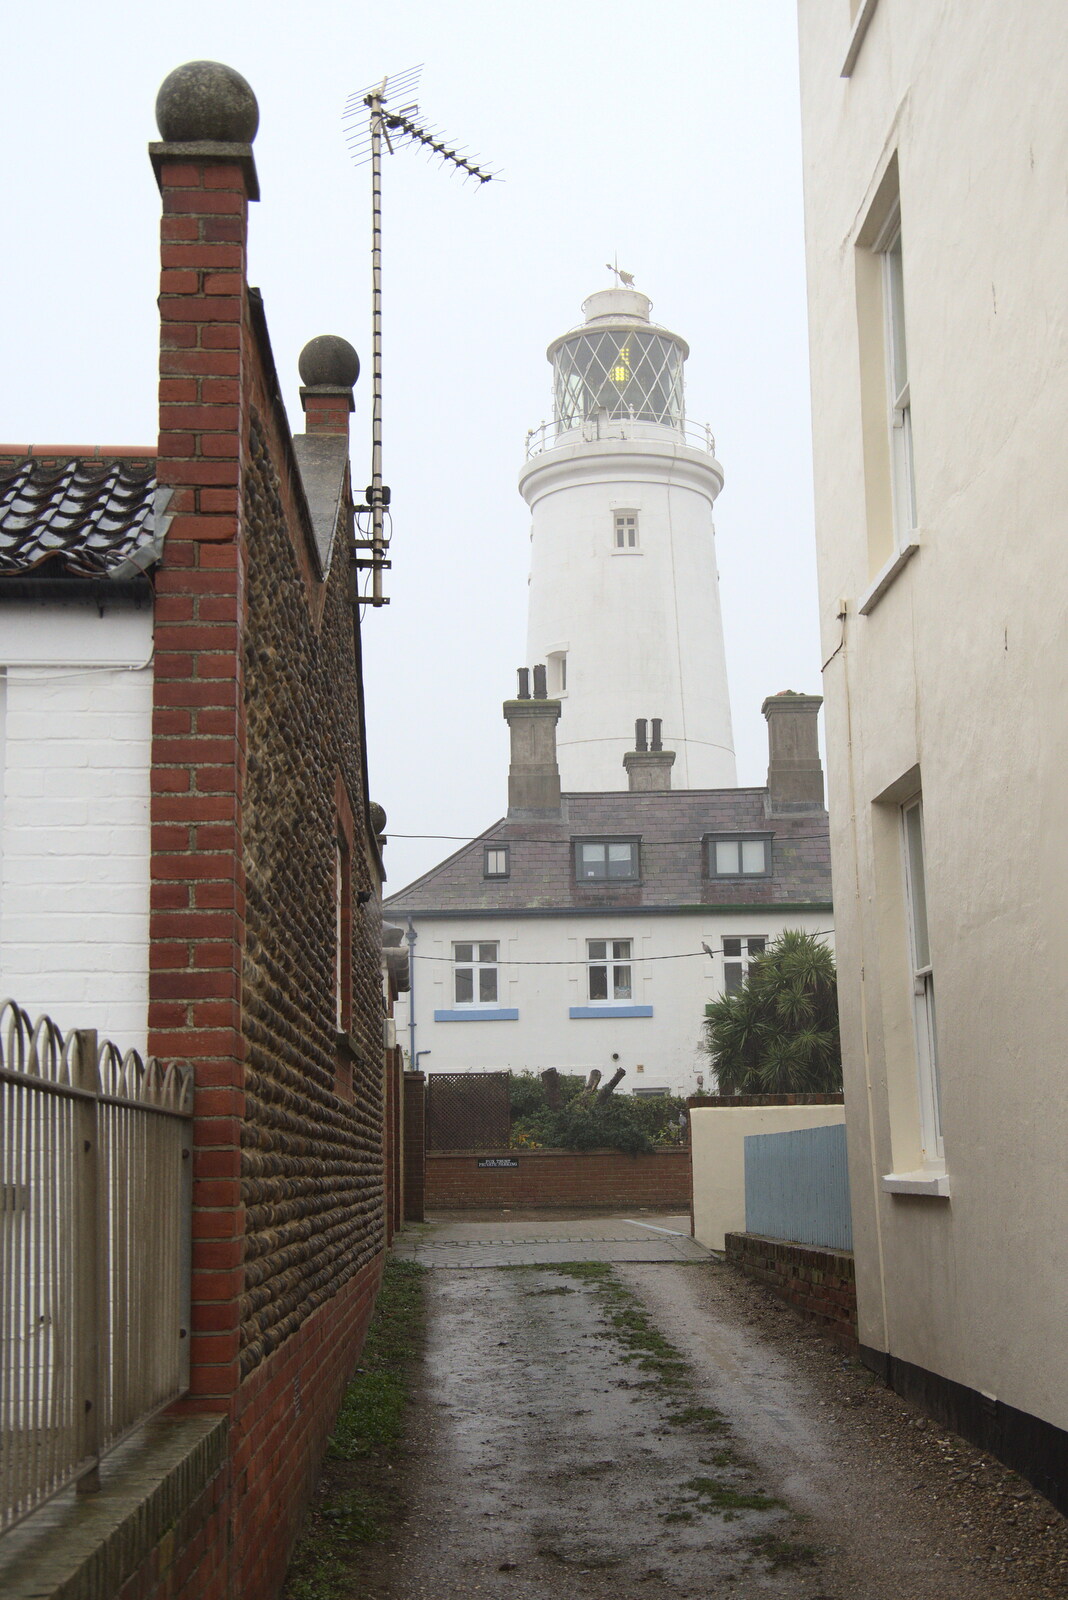 A different view of the lightbouse from A Few Hours at the Seaside, Southwold, Suffolk - 27th December 2021